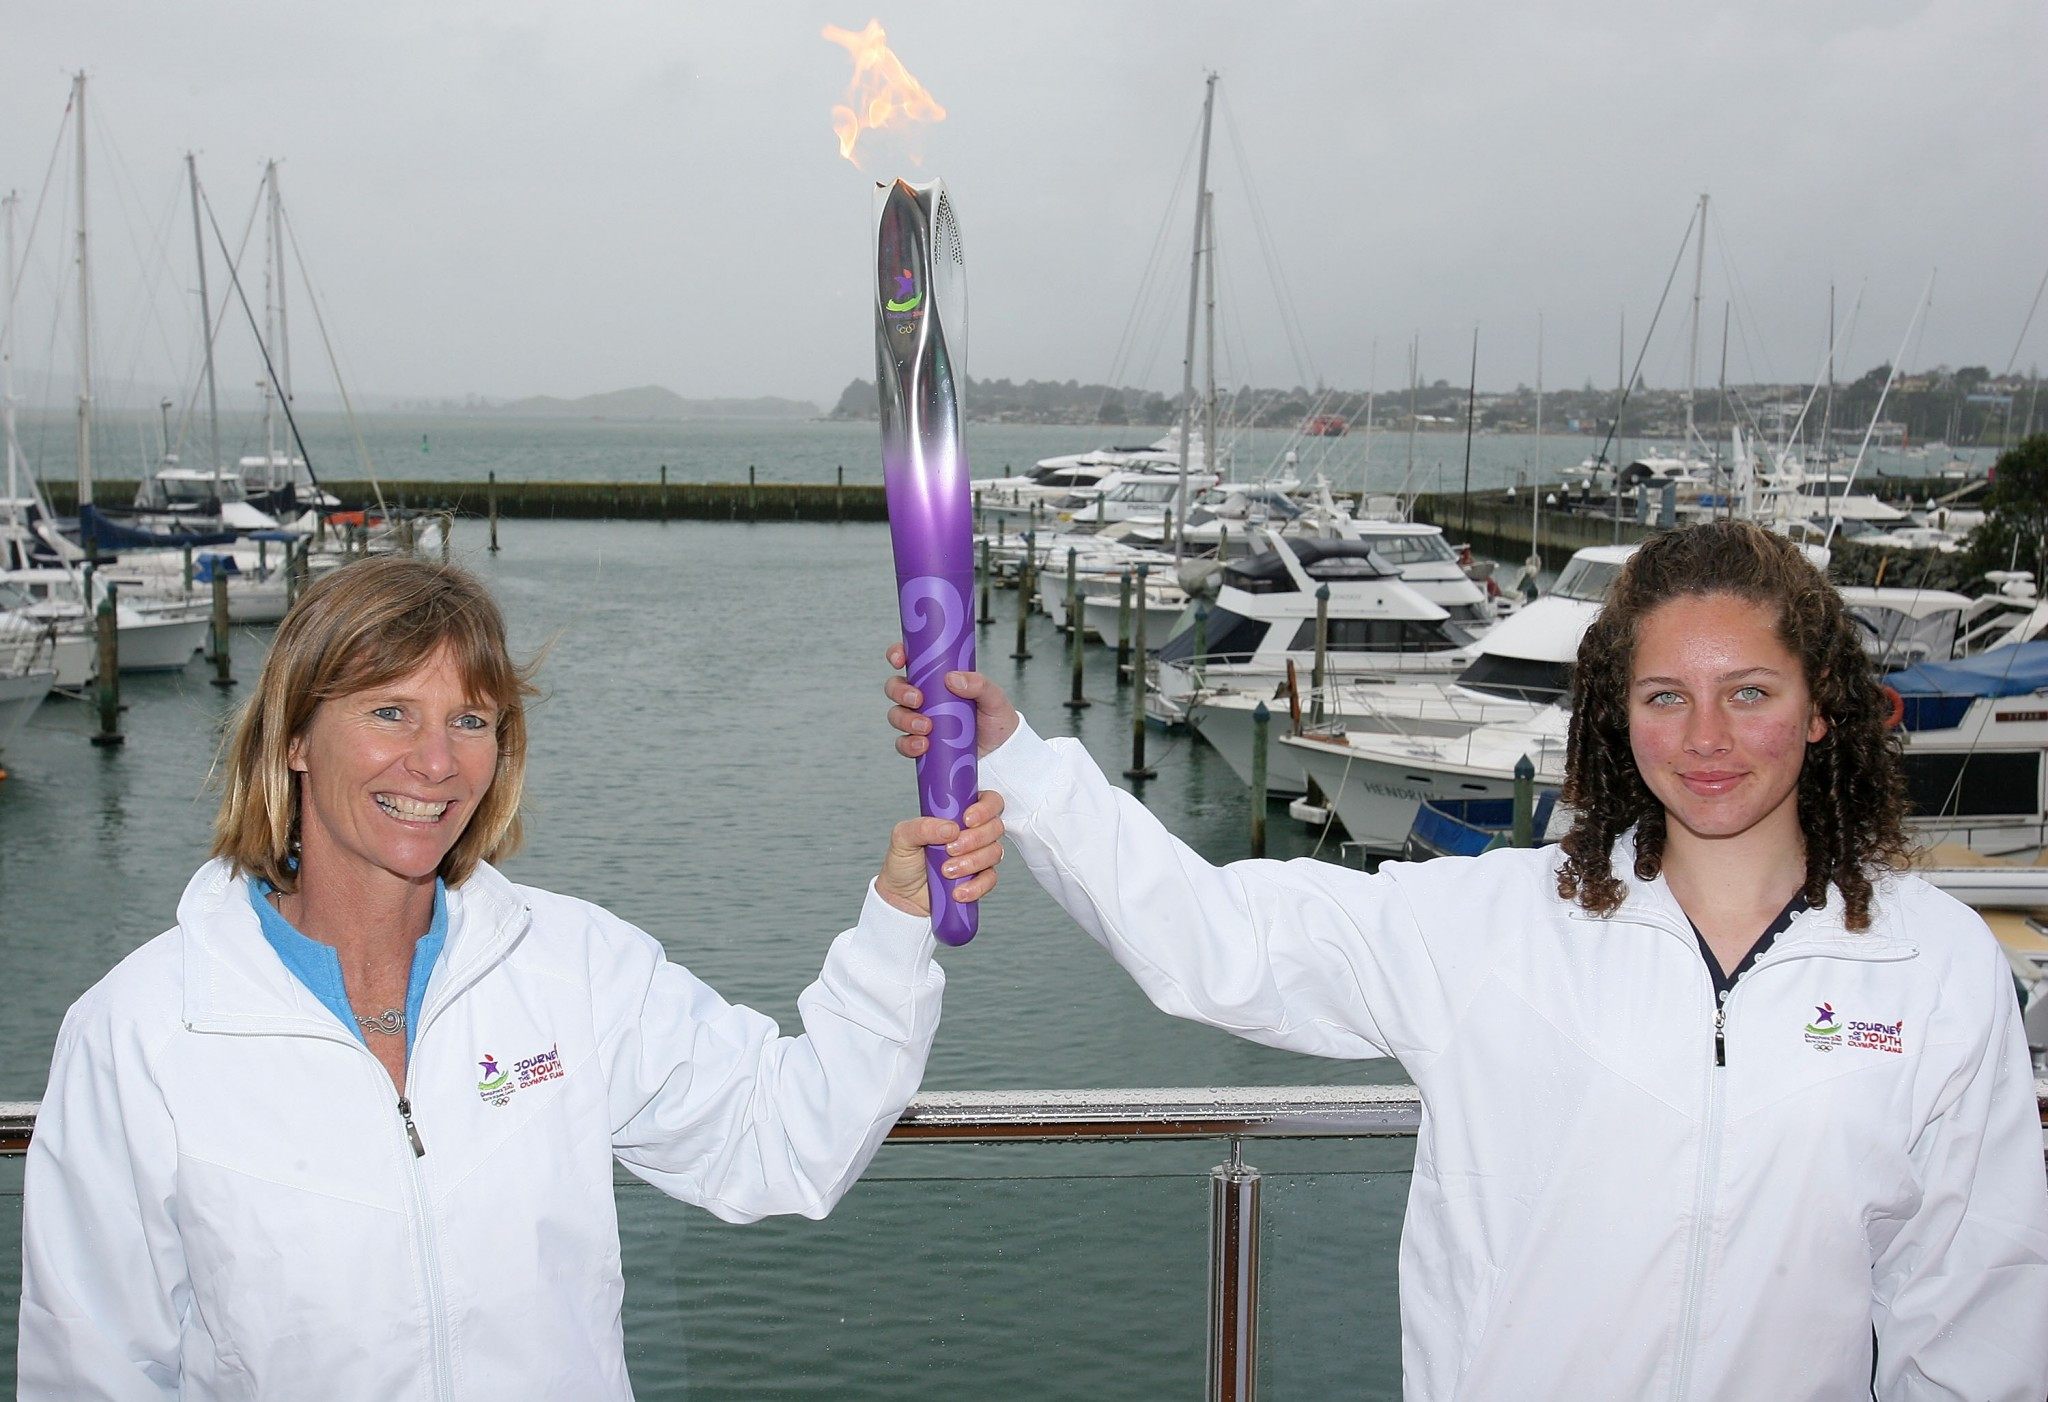 Barbara Kendall, left, has been an ambassador for every Youth Olympic Games since they were launched in Singapore in 2010 and will be New Zealand's Chef de Mission at Buenos Aires 2018 ©Getty Images